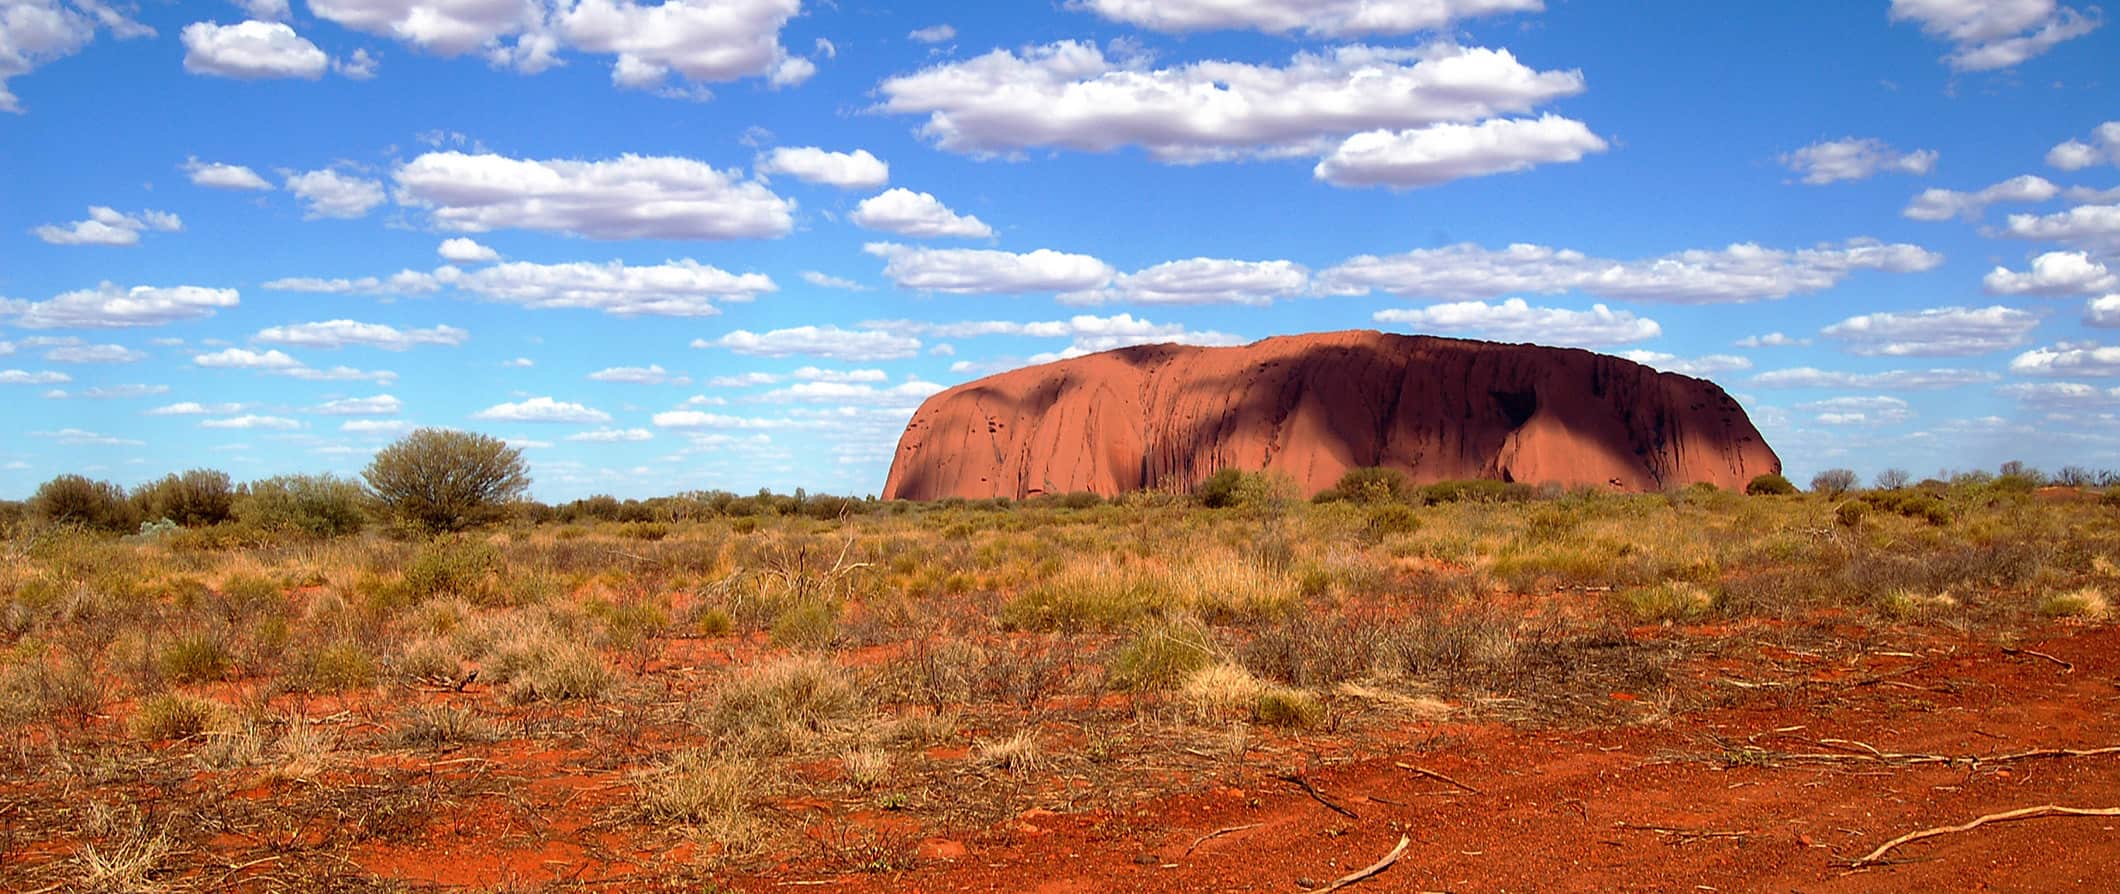 The famous Ayers Rock in Australia, also known as Uluru